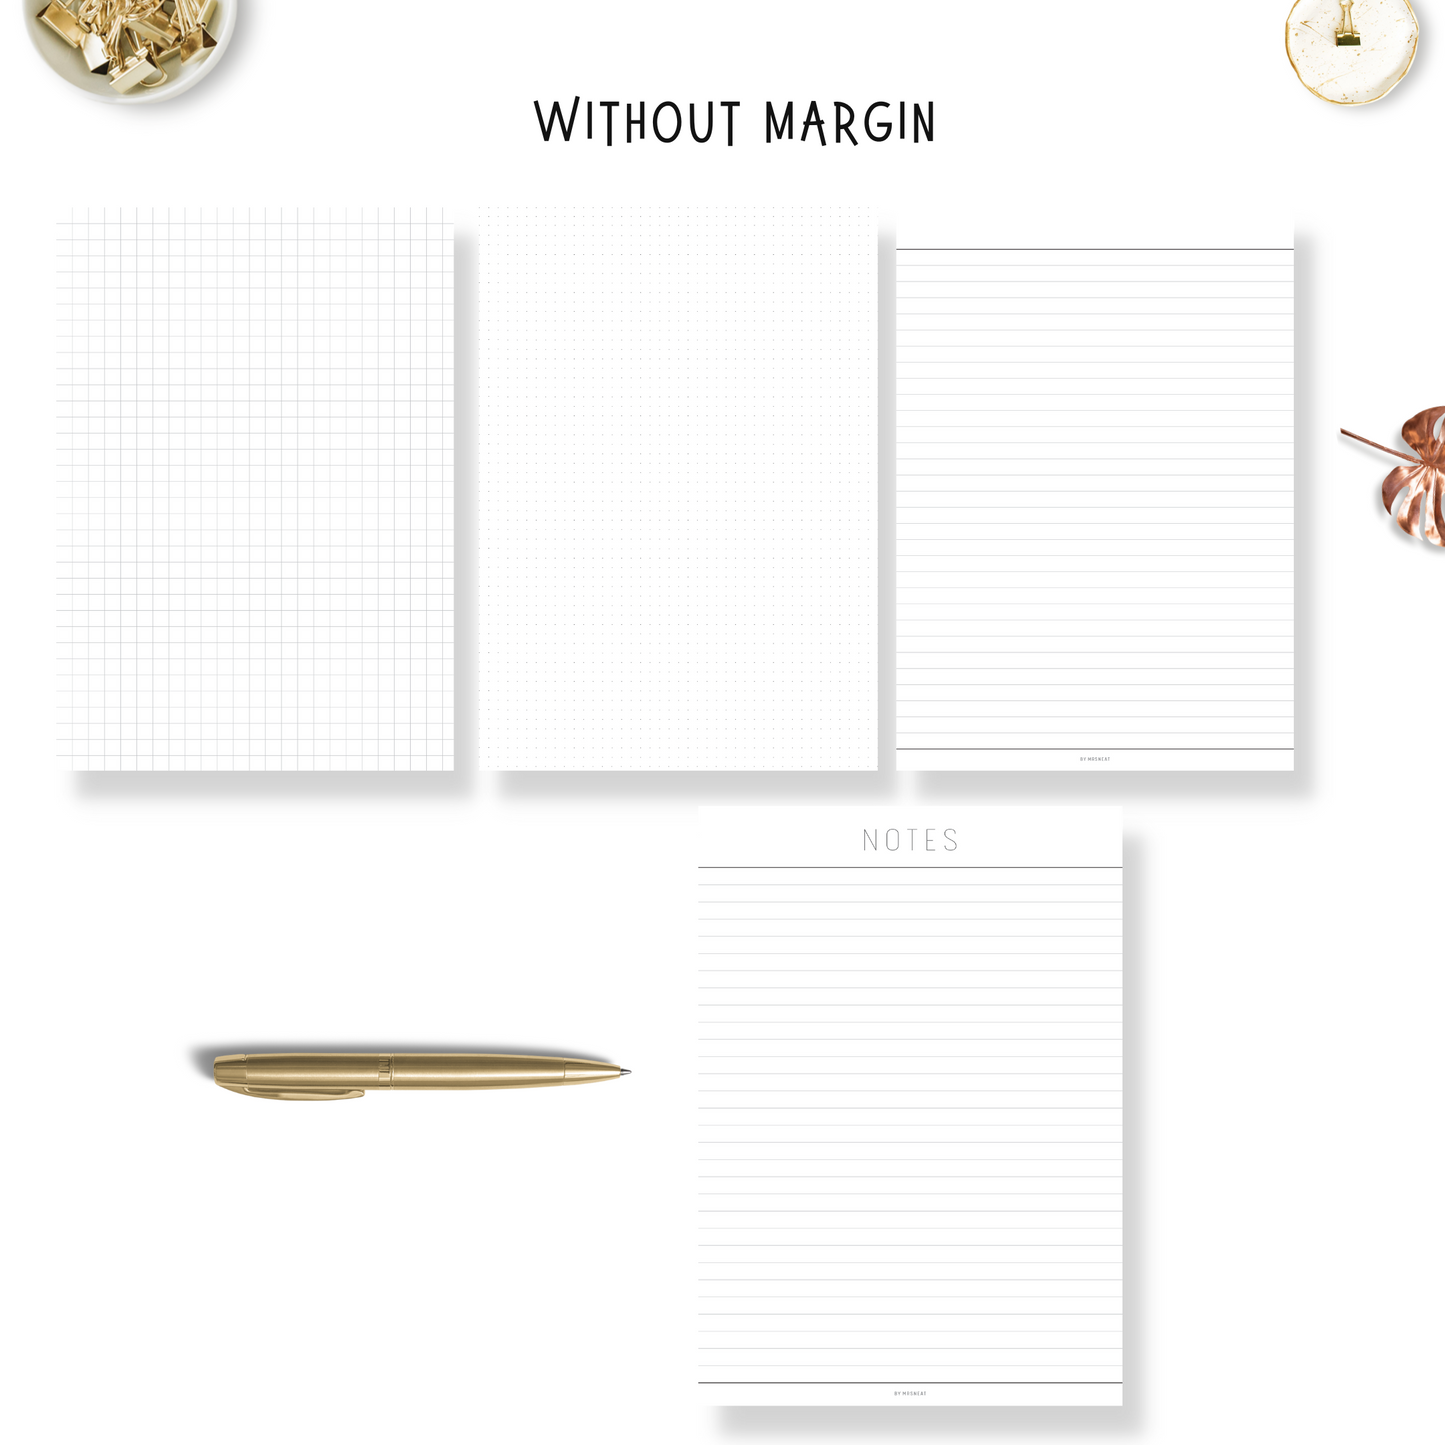 Cute and Clean Dotted Page, Grid Page, Lined Page and Notes Page without margin